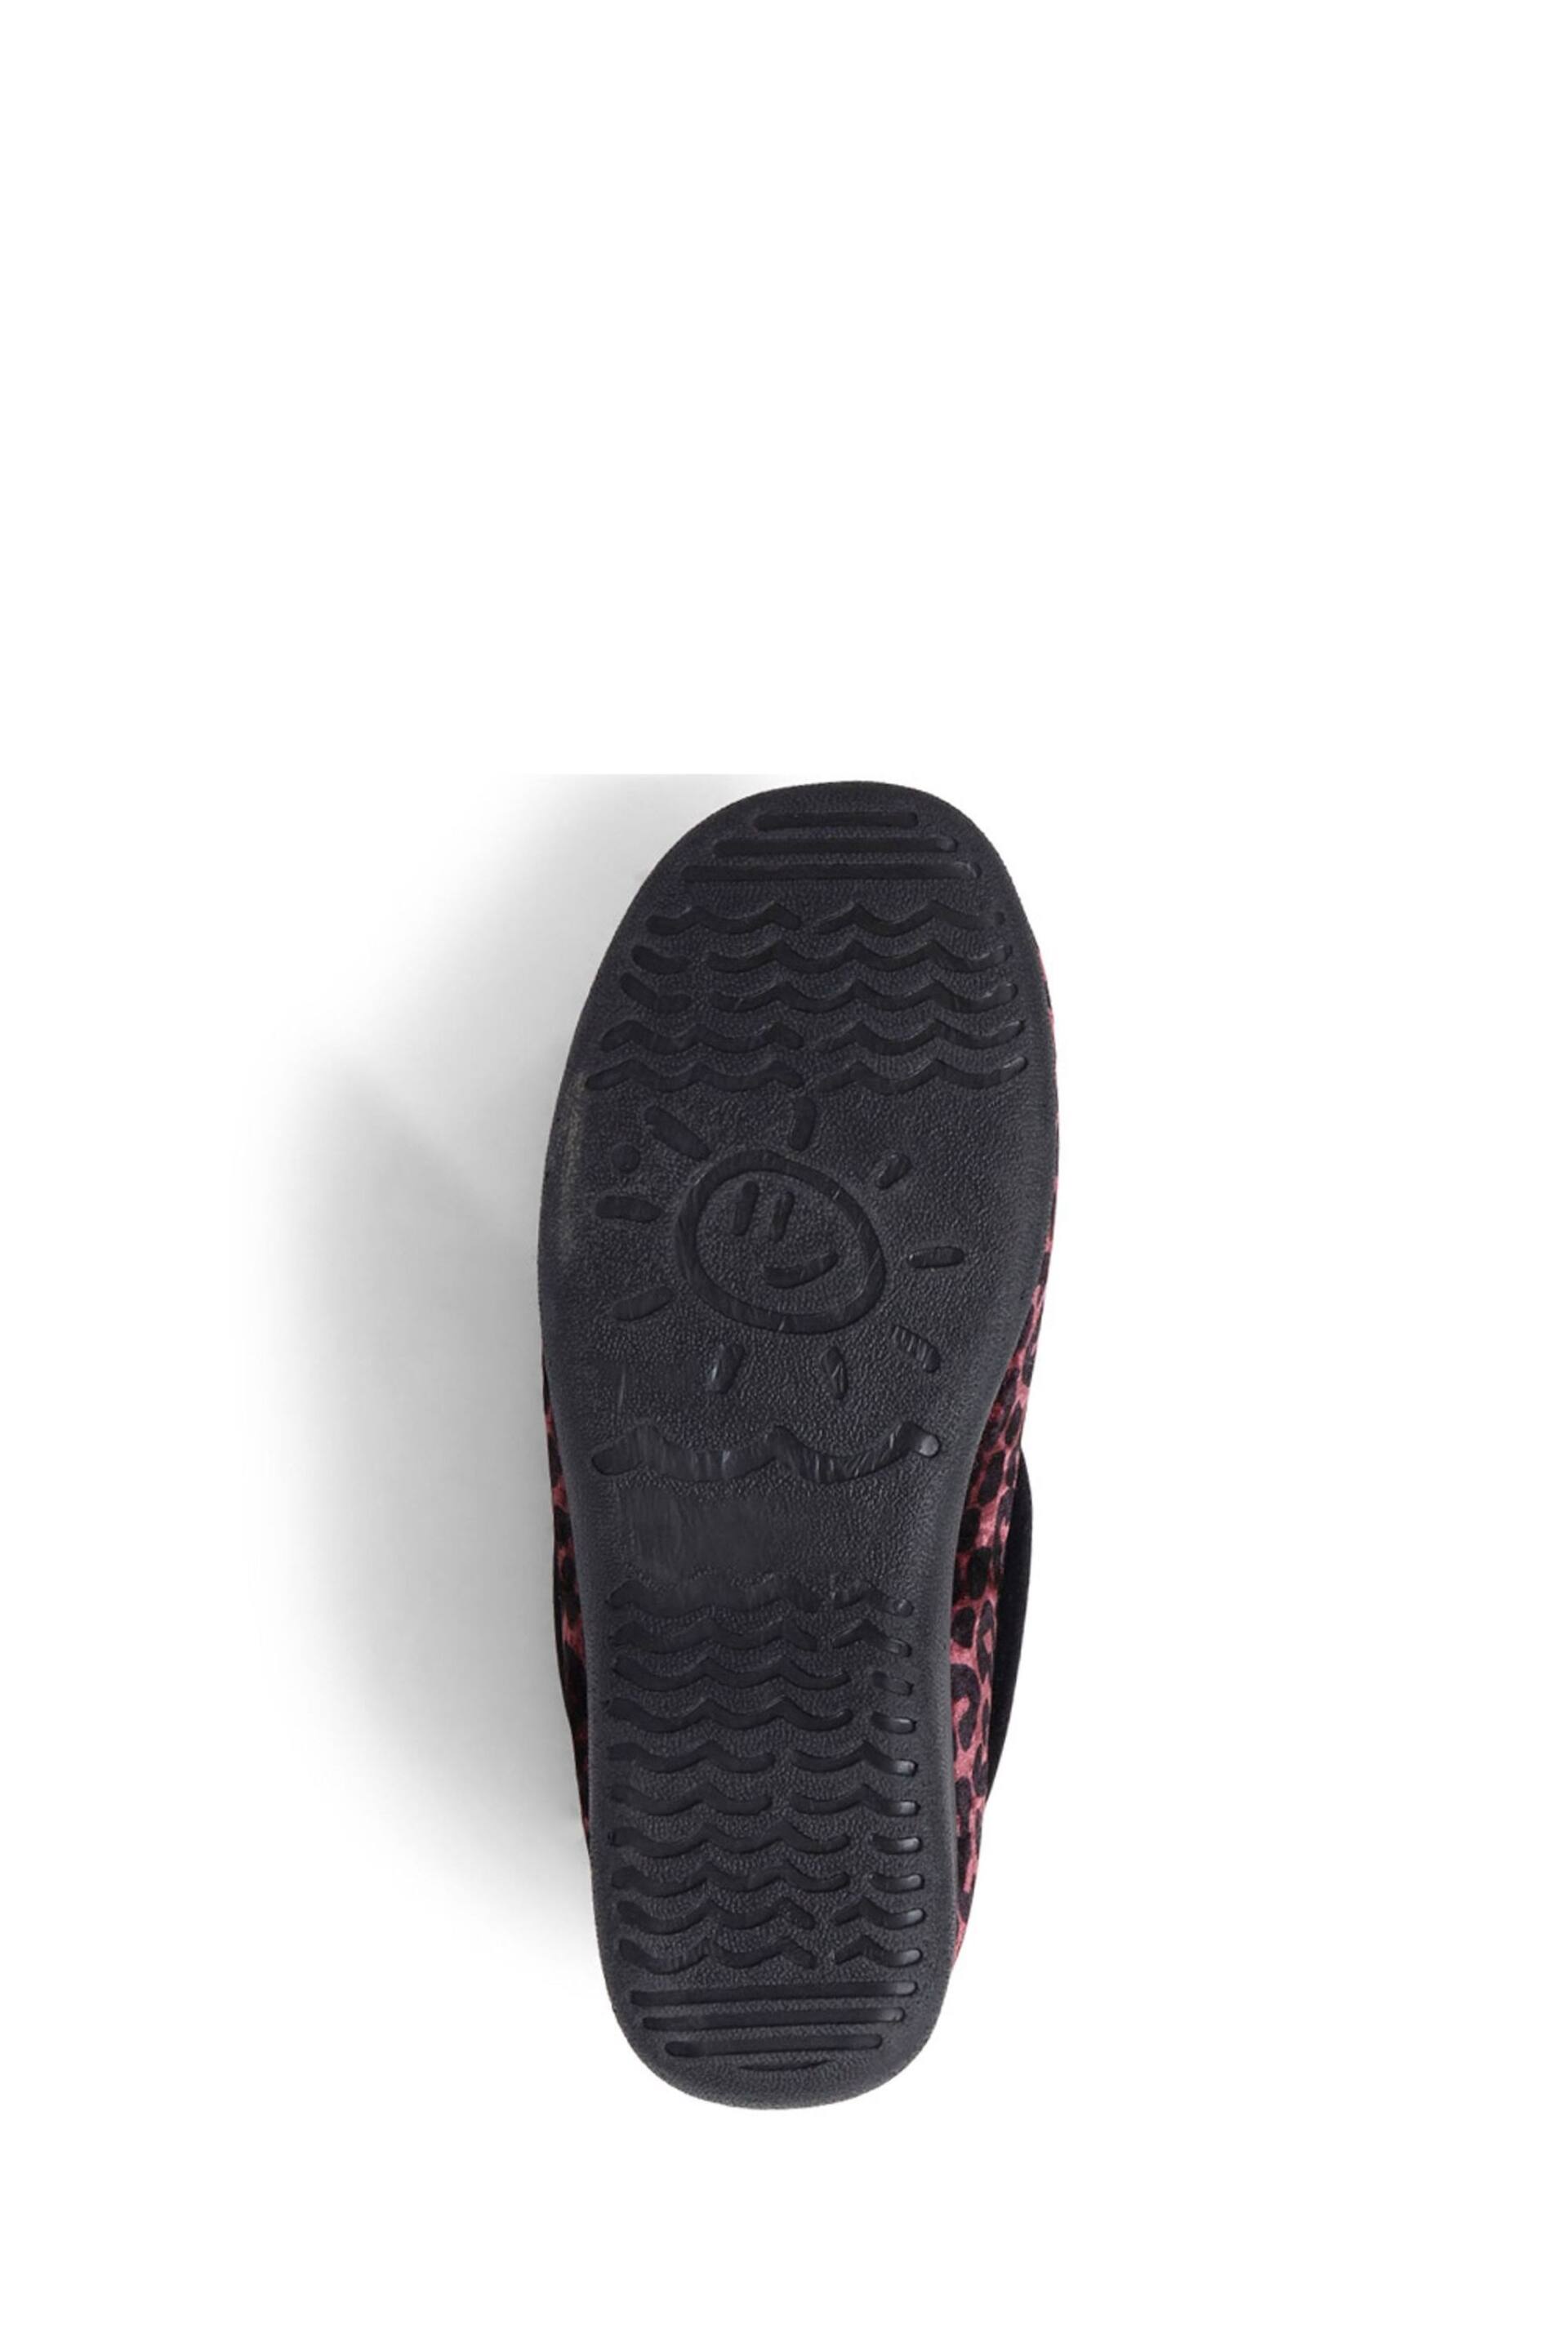 Pavers Red Leopard Print Casual Slippers - Image 5 of 5